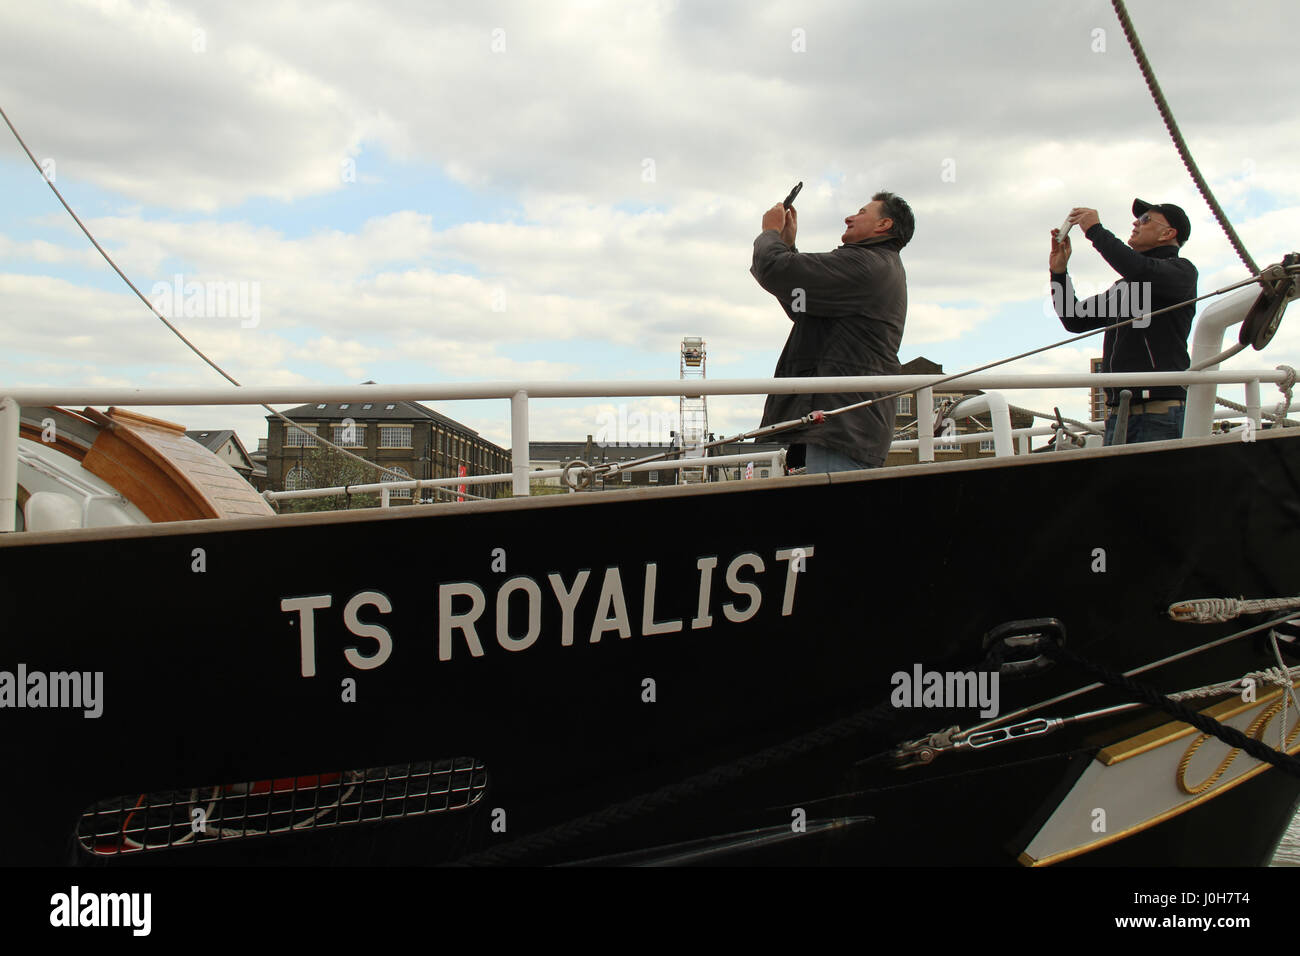 London, UK. 13th Apr, 2017. People seen taking photos on board the TS Royalist, docked at Woolwich Pier. Around 40 Tall Ships are scheduled to sail the river Thames to Greenwich, marking the 150th anniversary of the Canadian Confederation. Over the Easter weekend, on 13 to 16 April 2017, the ships will be anchored at the Maritime Greenwich UNESCO World Heritage Site in Greenwich town centre, and at the Royal Arsenal Riverside in Woolwich before they sail to Quebec, Canada, via Portugal, Bermuda and Boston. Credit: David Mbiyu/Alamy Live News Stock Photo